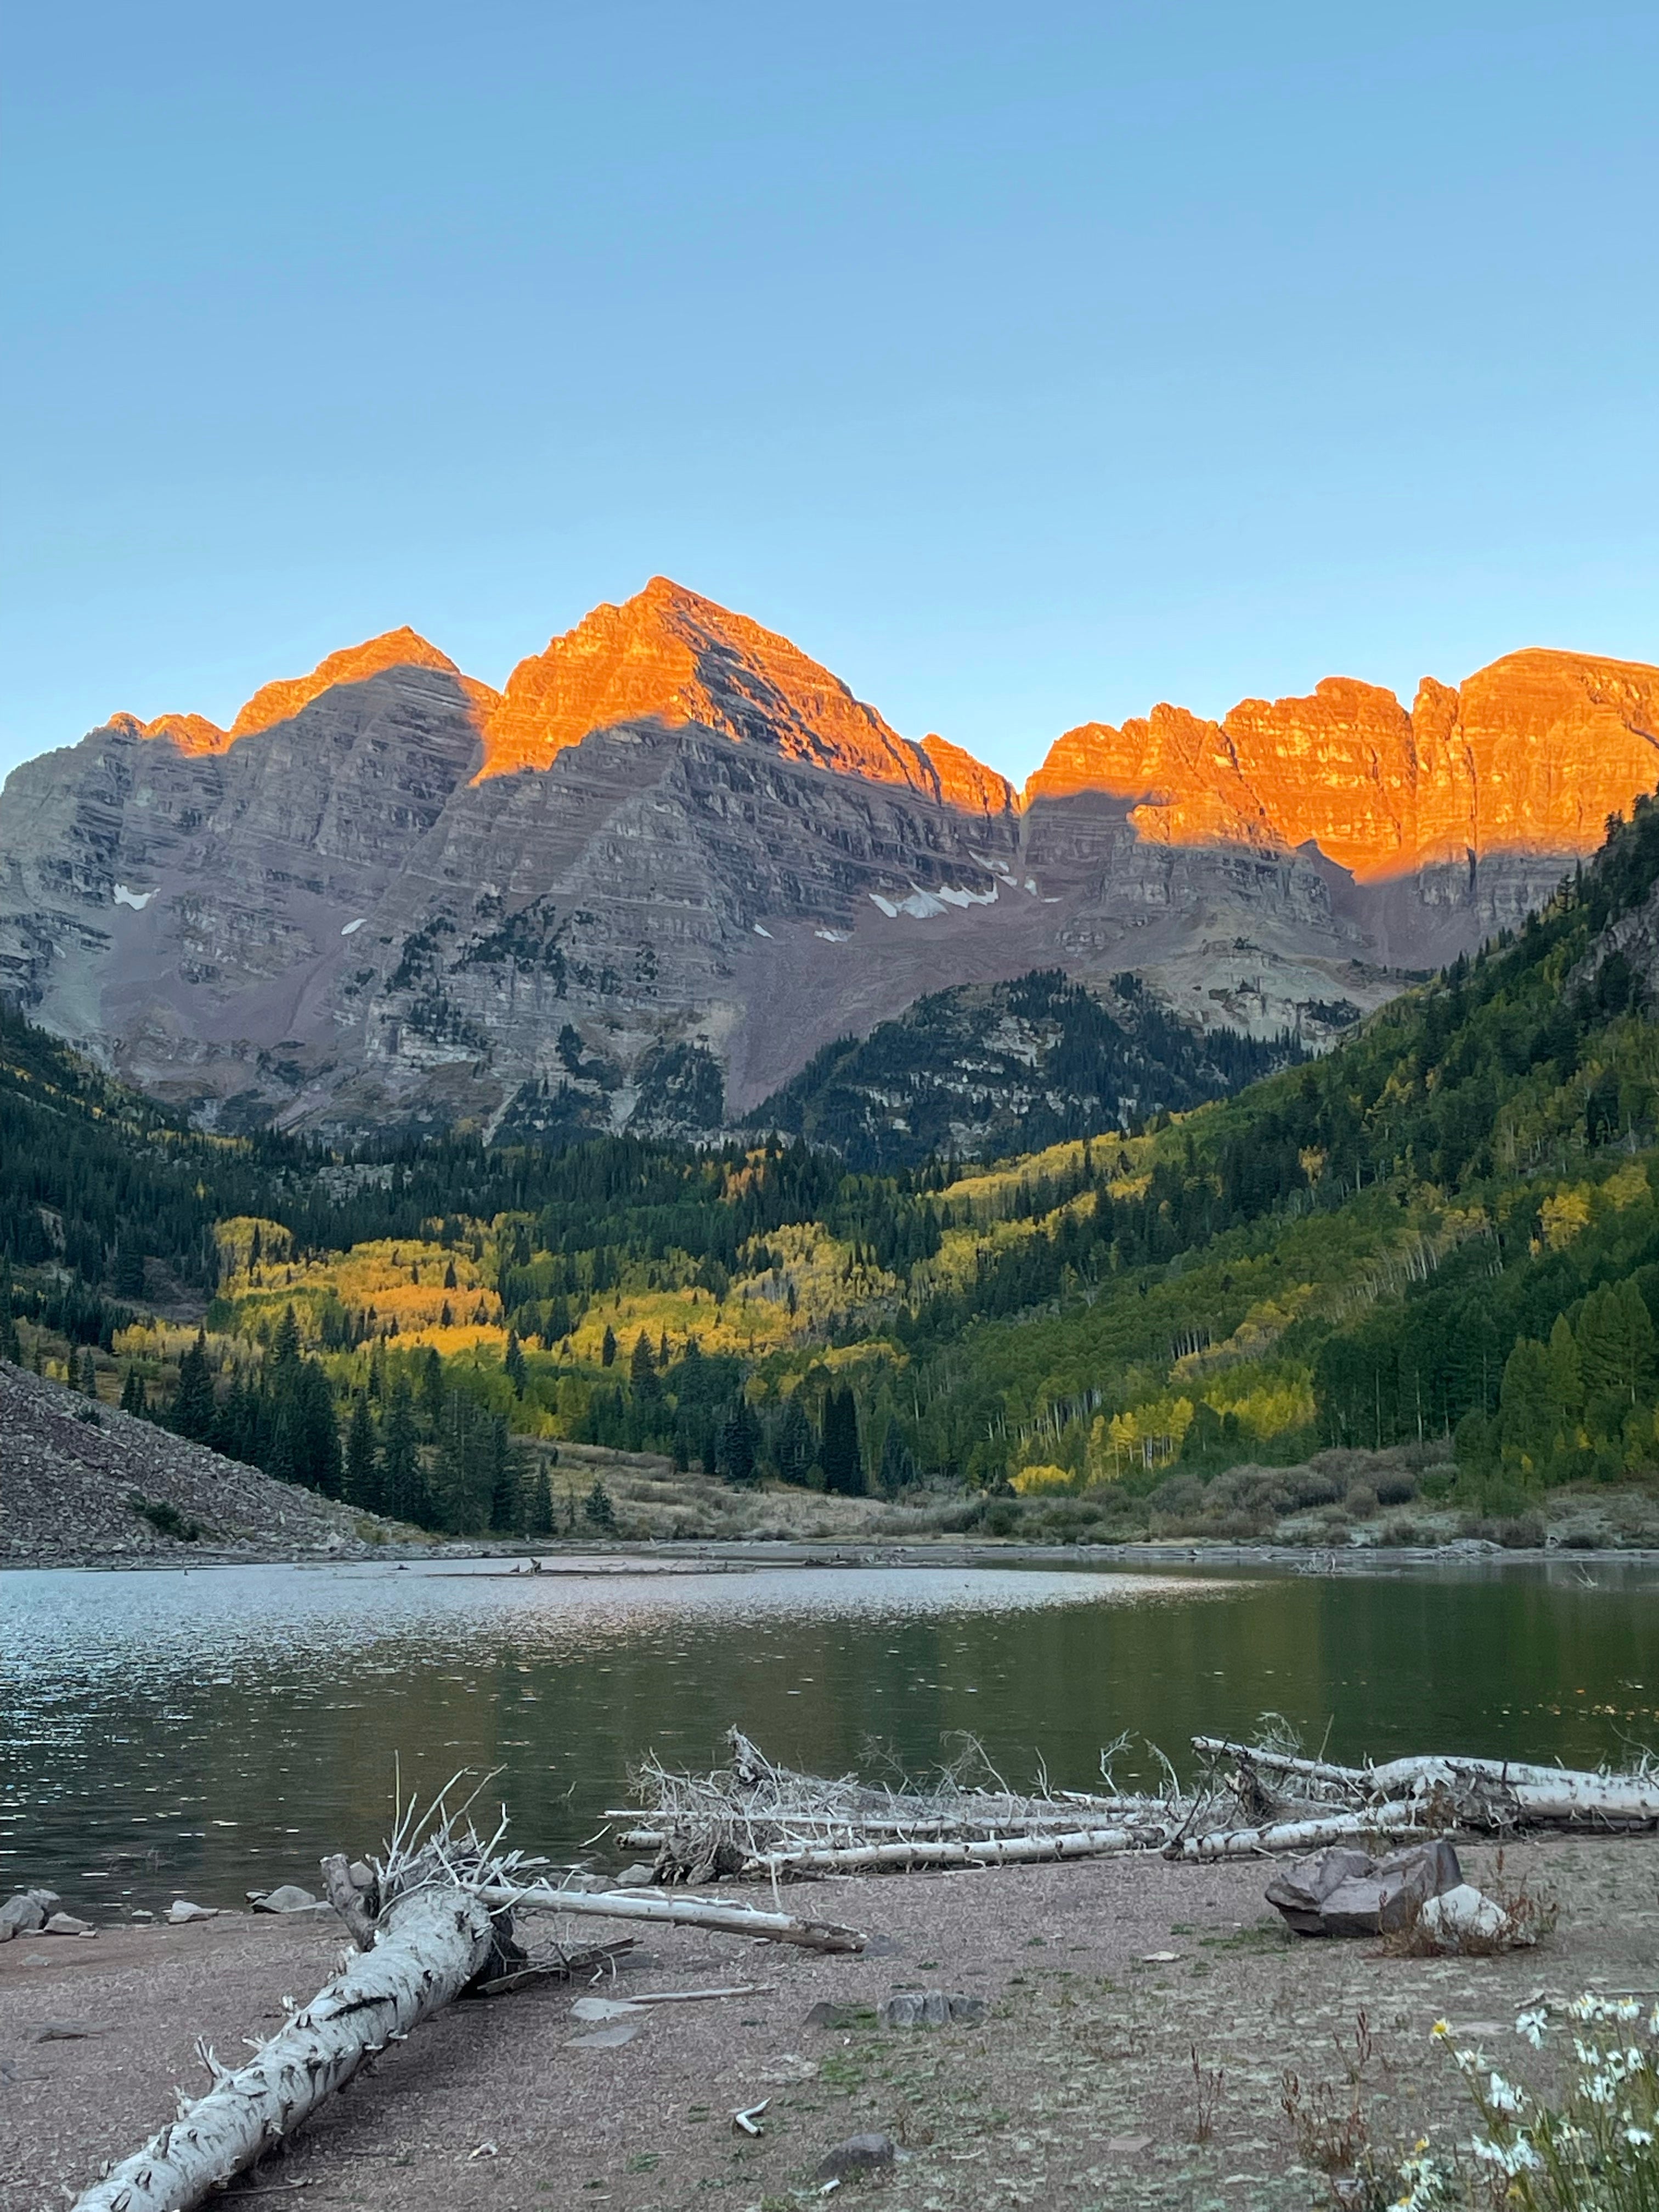 Camper submitted image from Maroon Bells Amphitheatre - 3